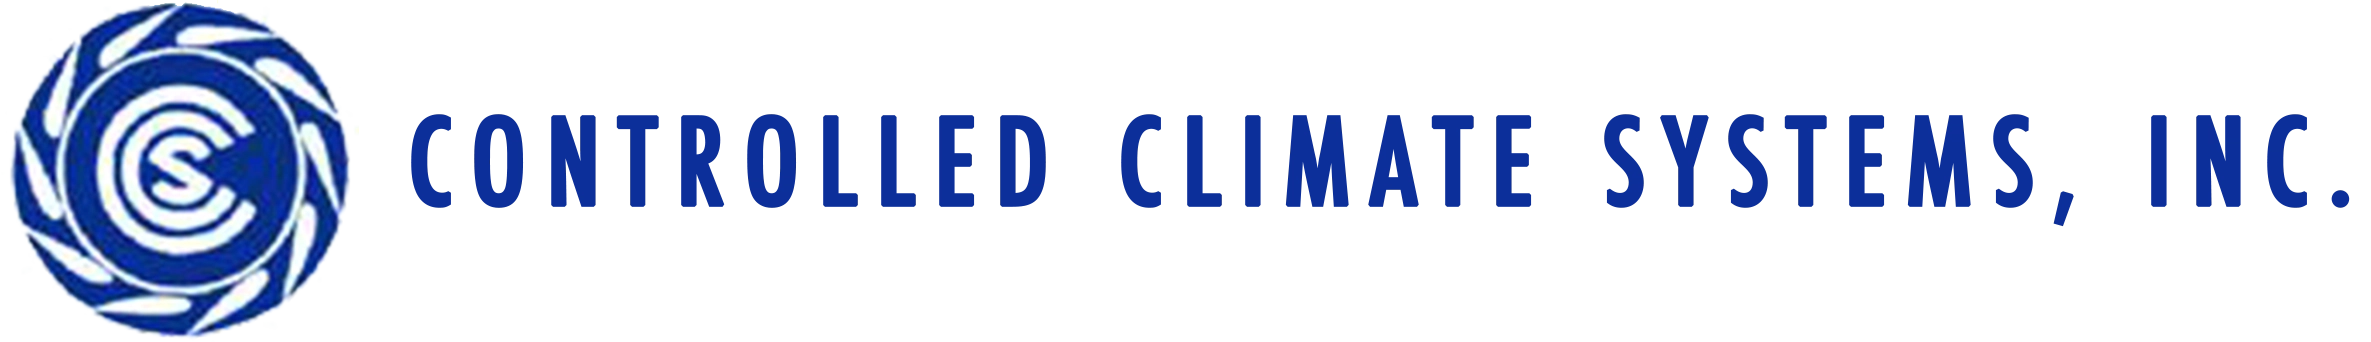 Controlled Climate Systems, Inc. Logo